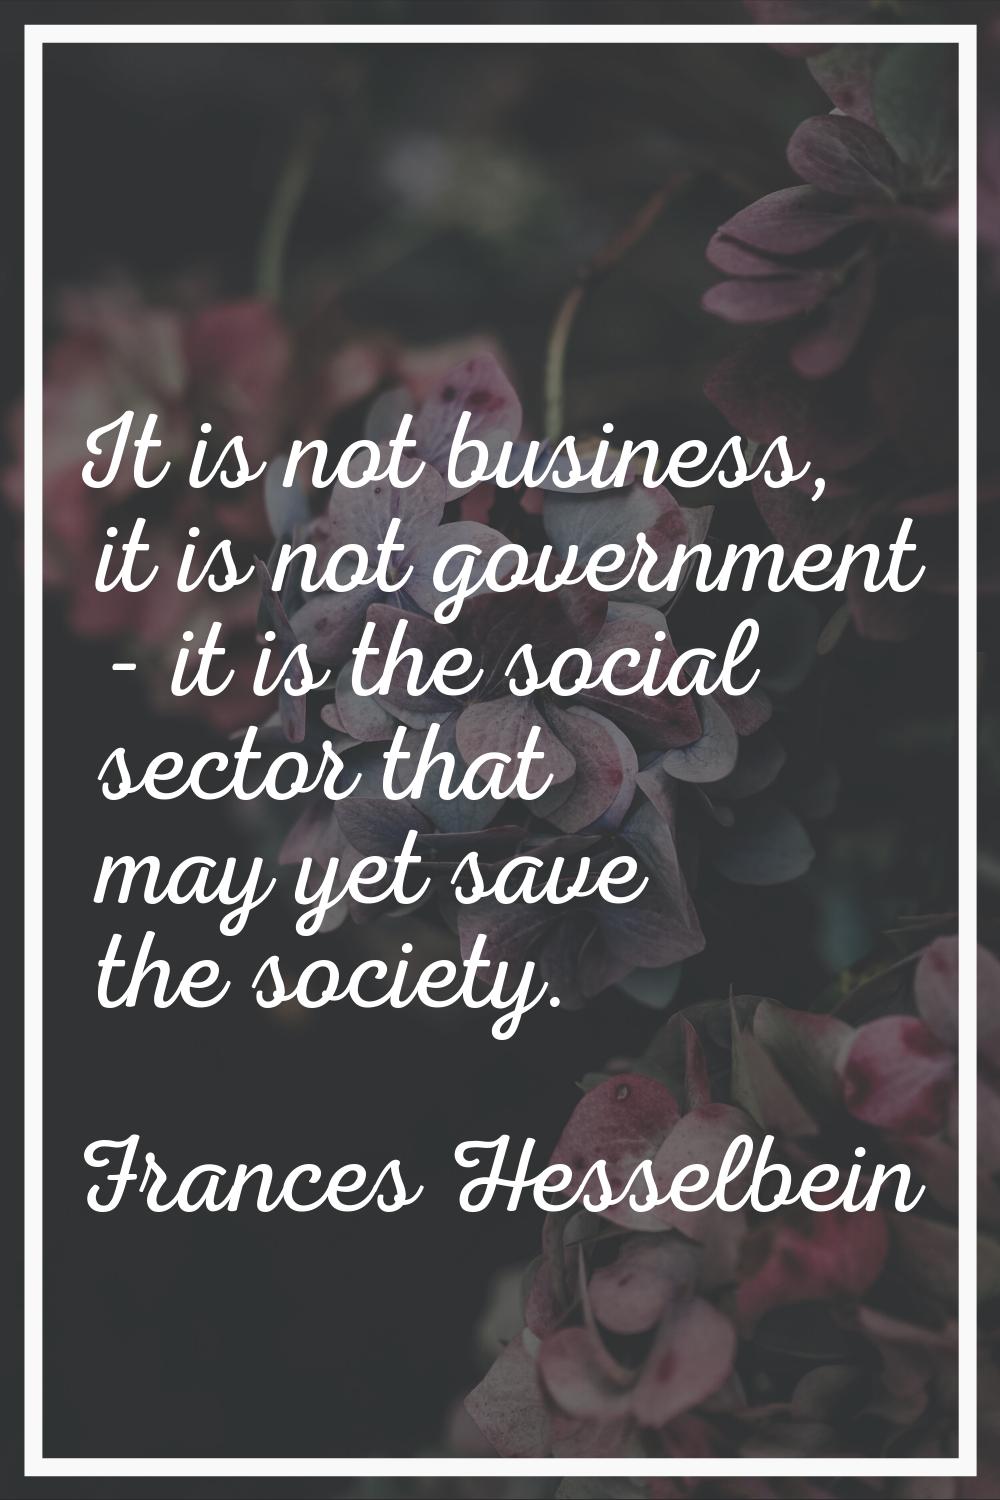 It is not business, it is not government - it is the social sector that may yet save the society.